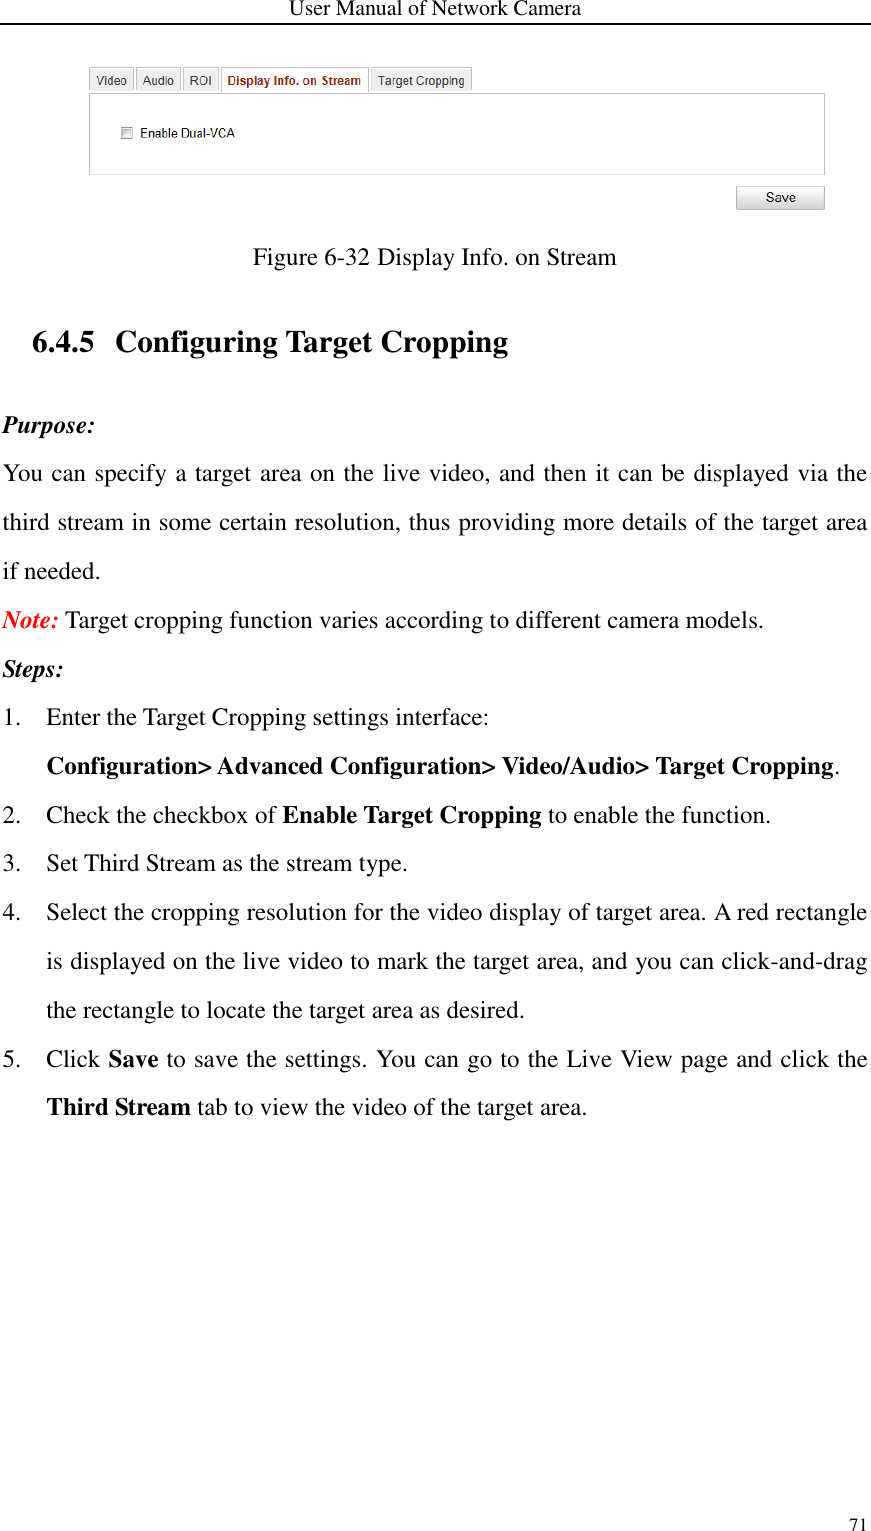 User Manual of Network Camera 71   Figure 6-32 Display Info. on Stream 6.4.5 Configuring Target Cropping Purpose: You can specify a target area on the live video, and then it can be displayed via the third stream in some certain resolution, thus providing more details of the target area if needed. Note: Target cropping function varies according to different camera models. Steps: 1. Enter the Target Cropping settings interface:   Configuration&gt; Advanced Configuration&gt; Video/Audio&gt; Target Cropping. 2. Check the checkbox of Enable Target Cropping to enable the function. 3. Set Third Stream as the stream type. 4. Select the cropping resolution for the video display of target area. A red rectangle is displayed on the live video to mark the target area, and you can click-and-drag the rectangle to locate the target area as desired. 5. Click Save to save the settings. You can go to the Live View page and click the Third Stream tab to view the video of the target area. 